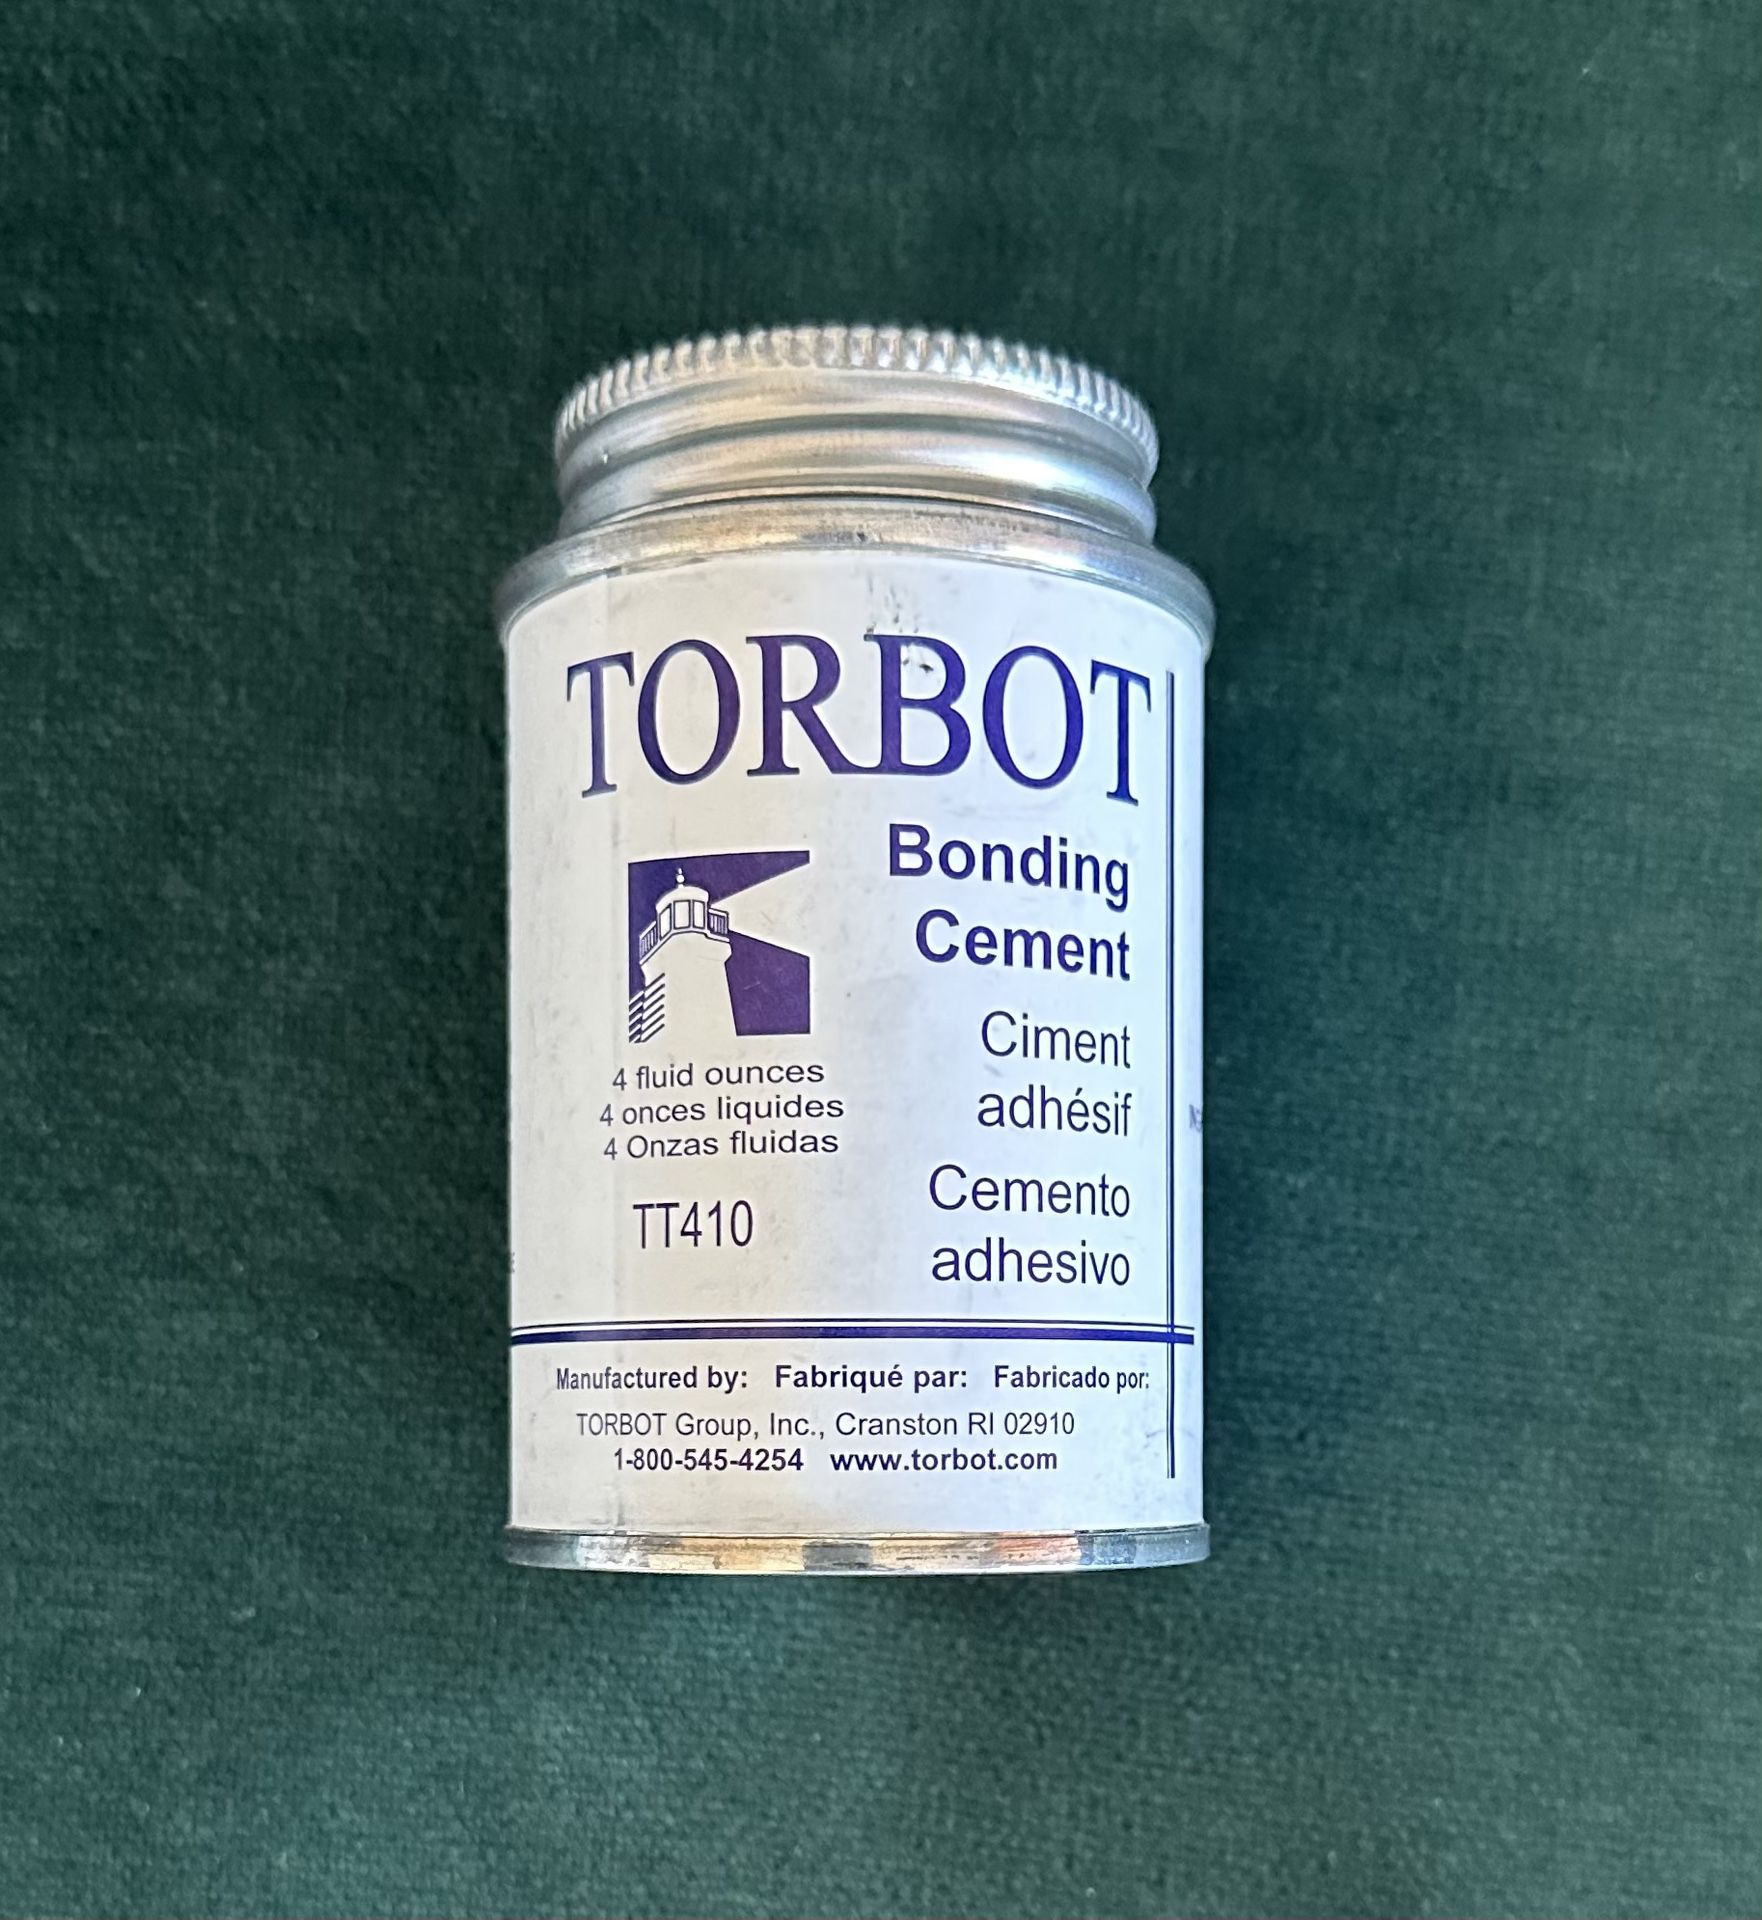 Torbot Bonding Cement for Sale in Poway, CA - OfferUp